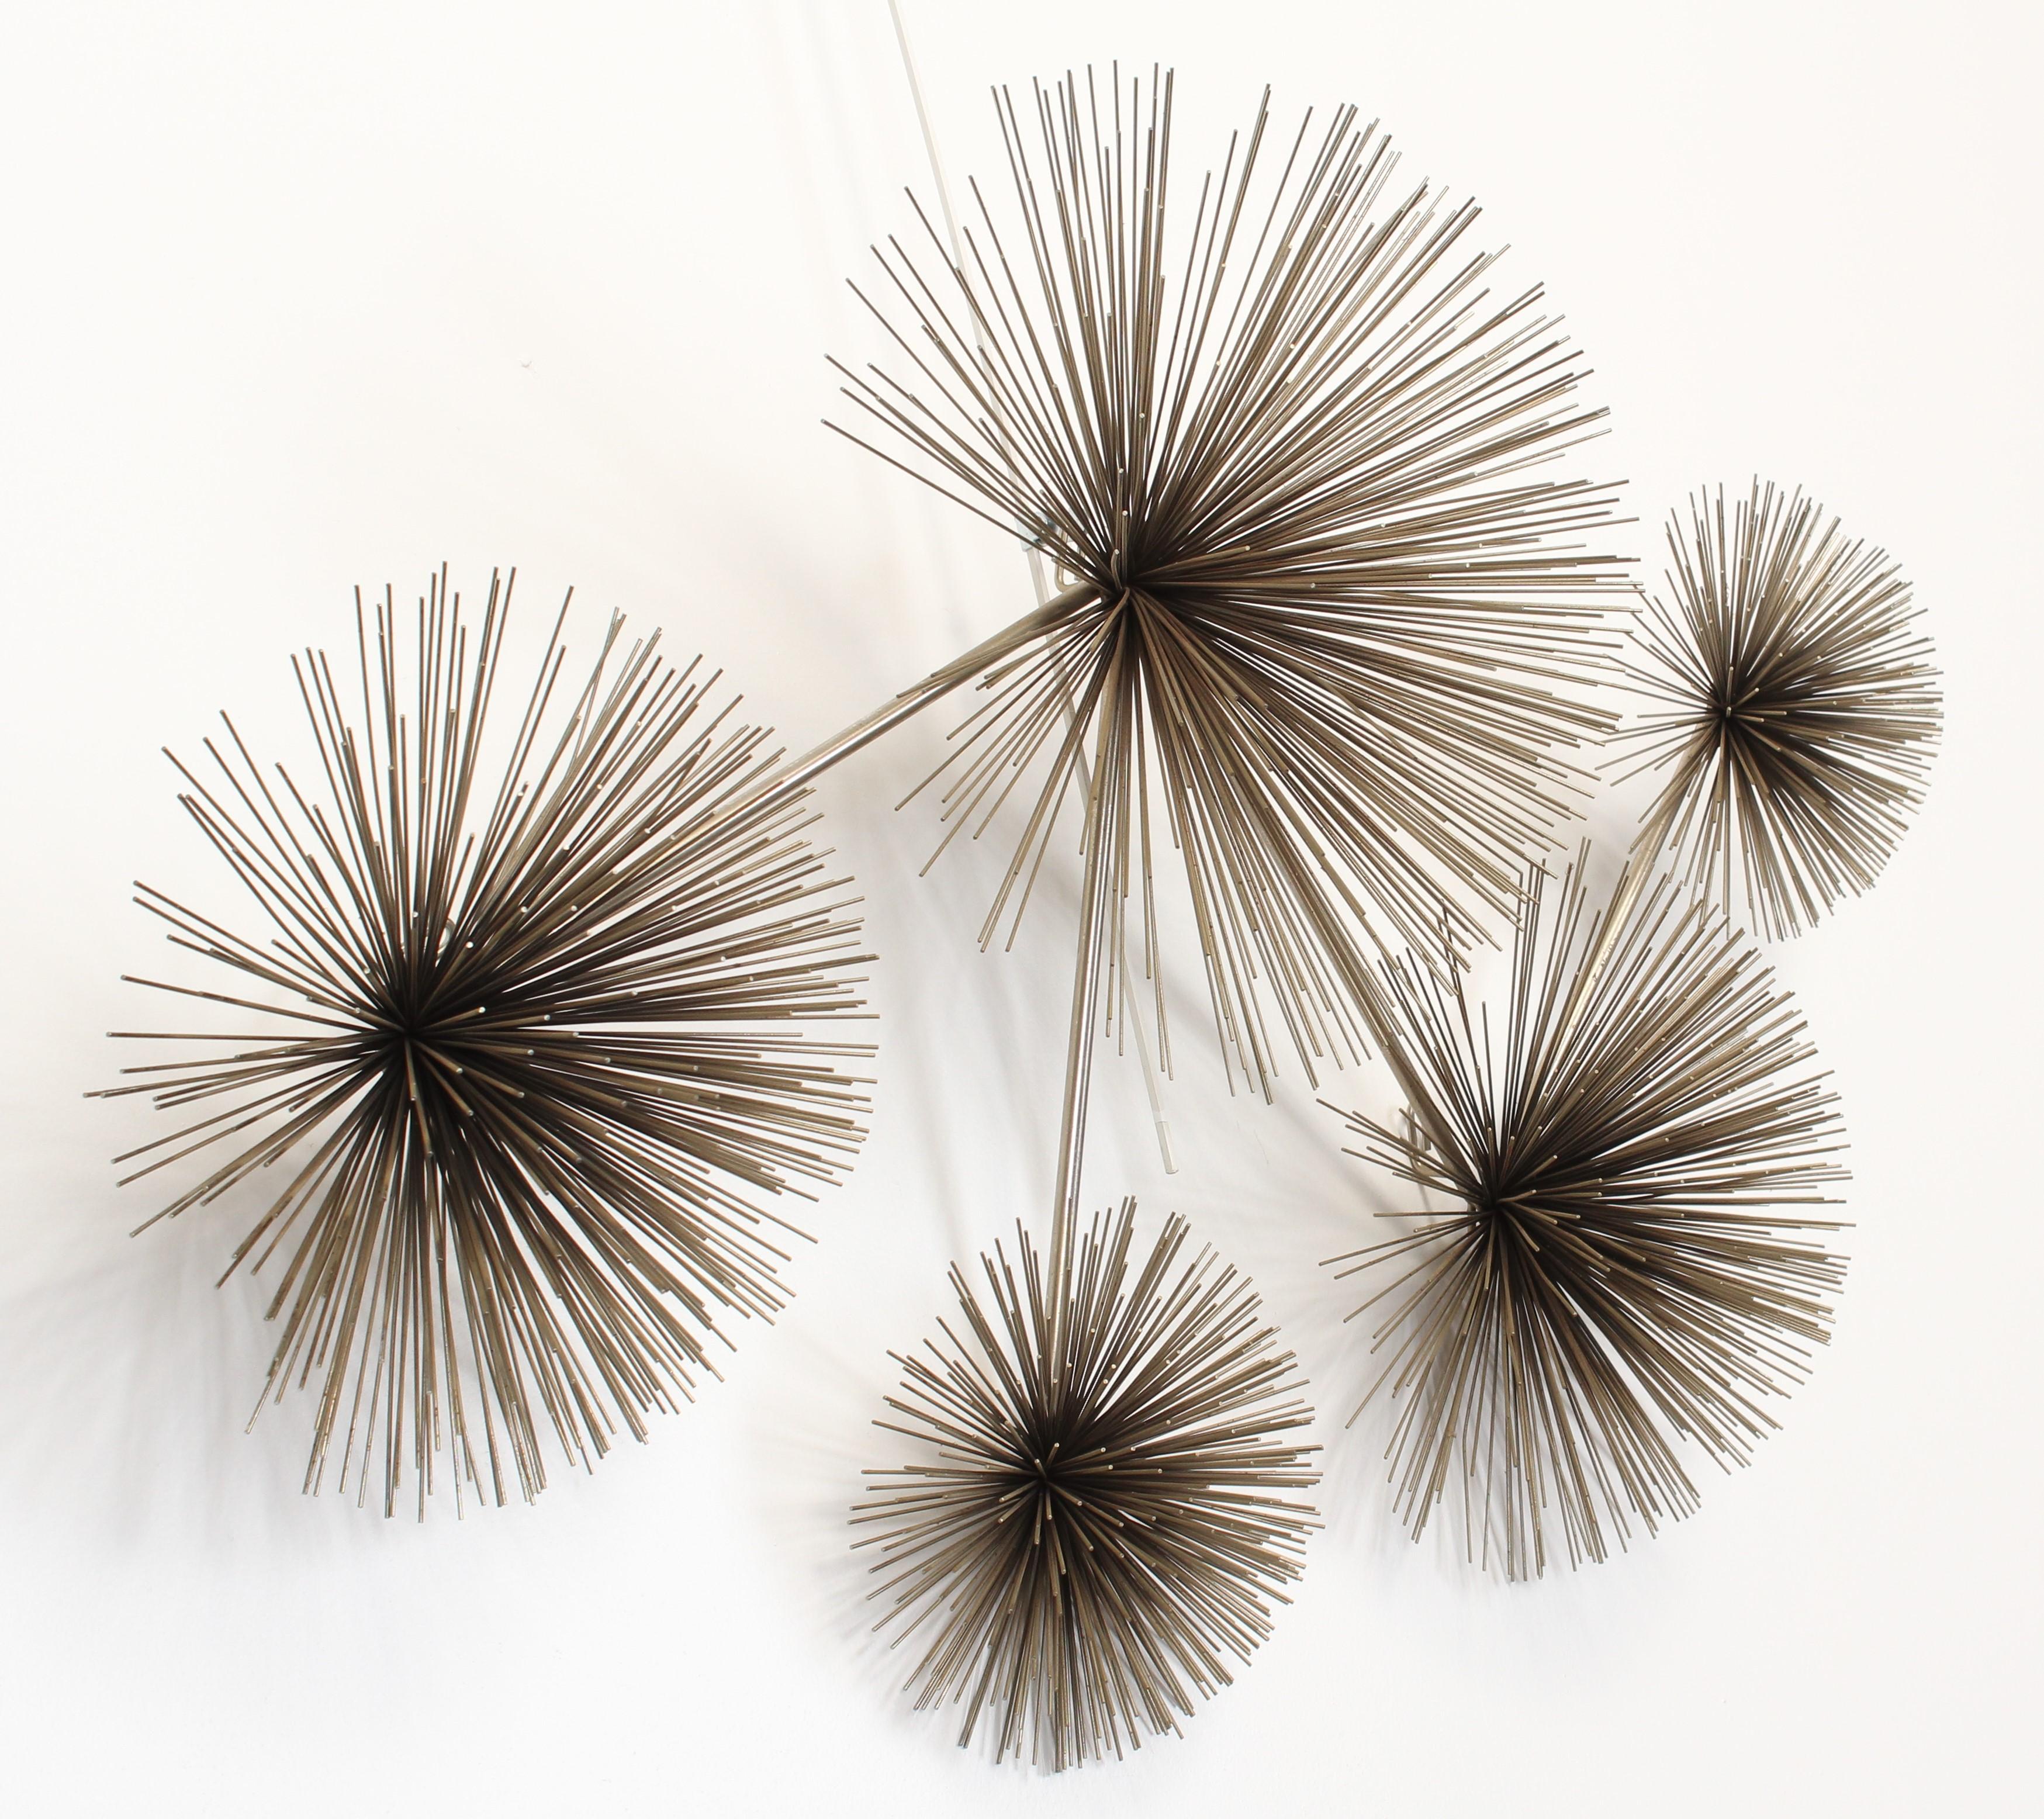 Mid-Century Modern Curtis Jere Pom Pom Wall Sculpture Signed and Dated 1979